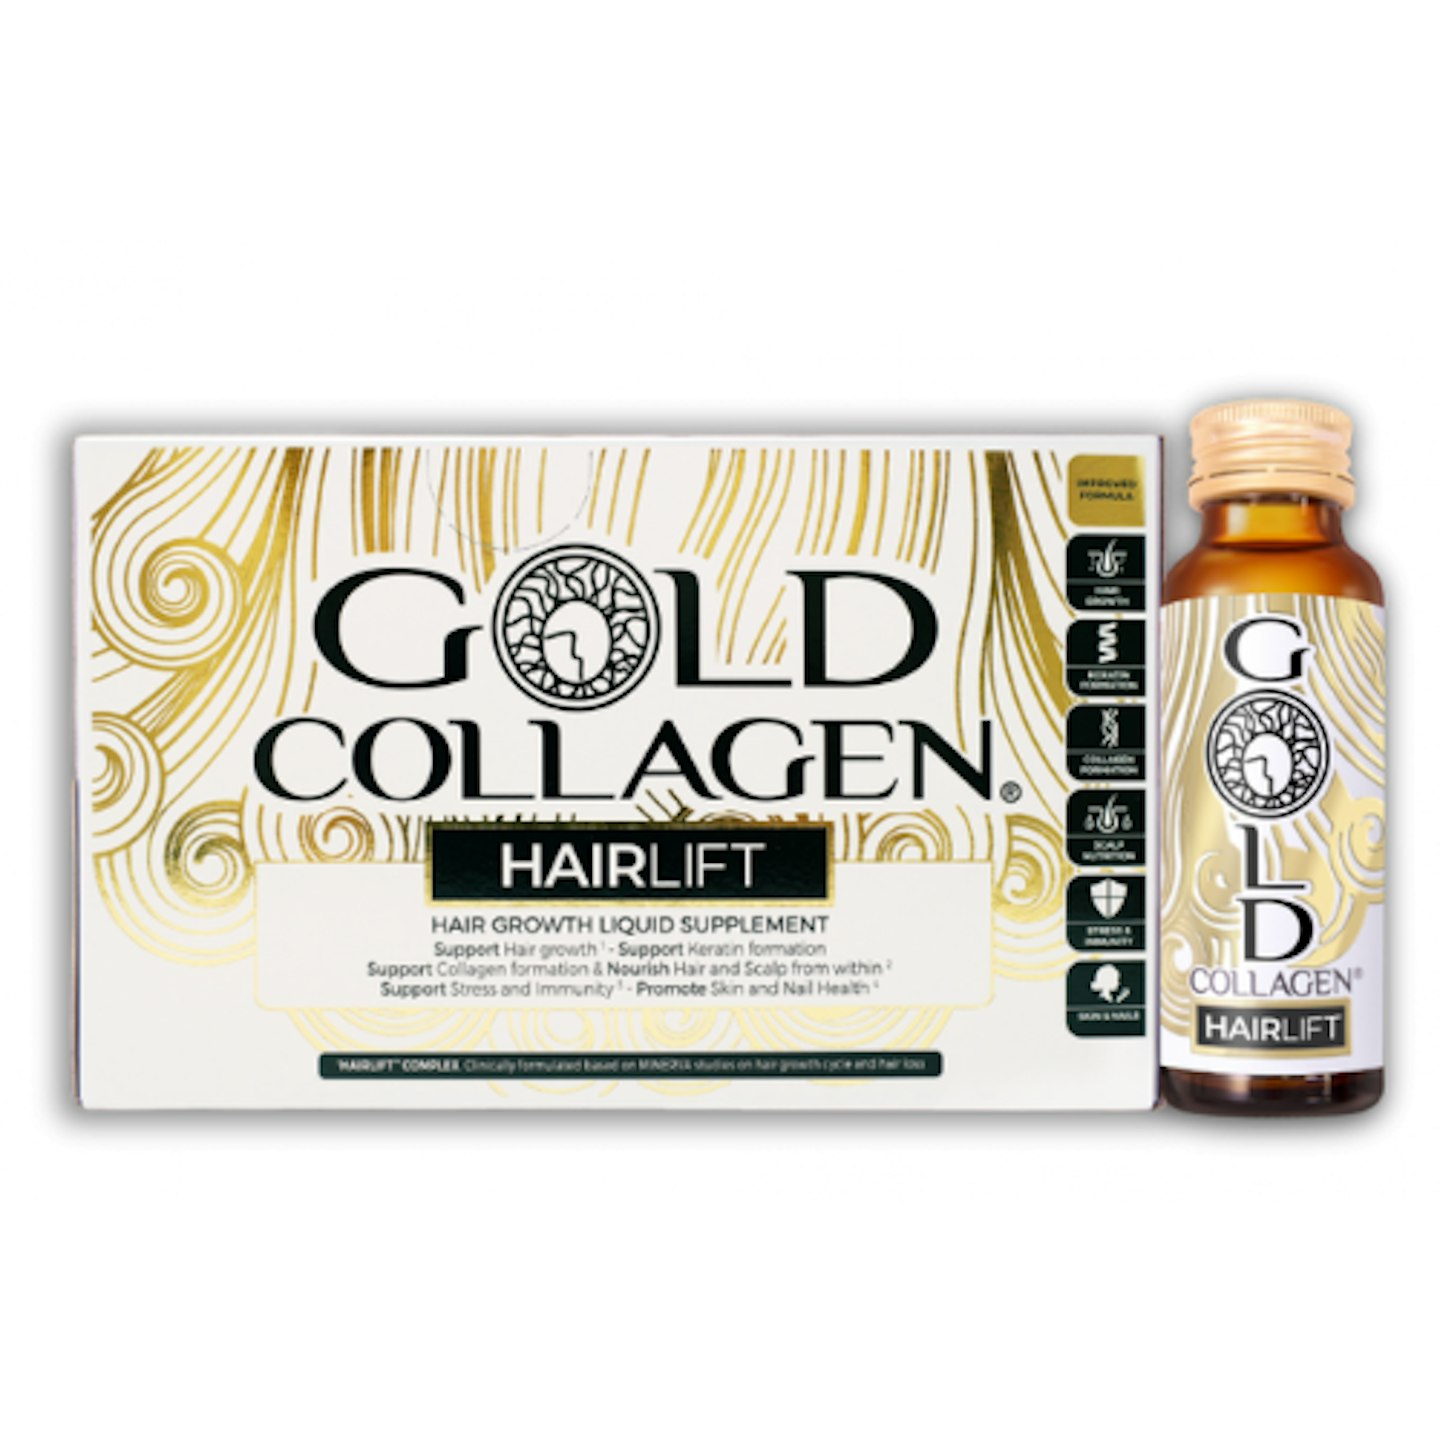 Gold Collagen Hairlift, From £40